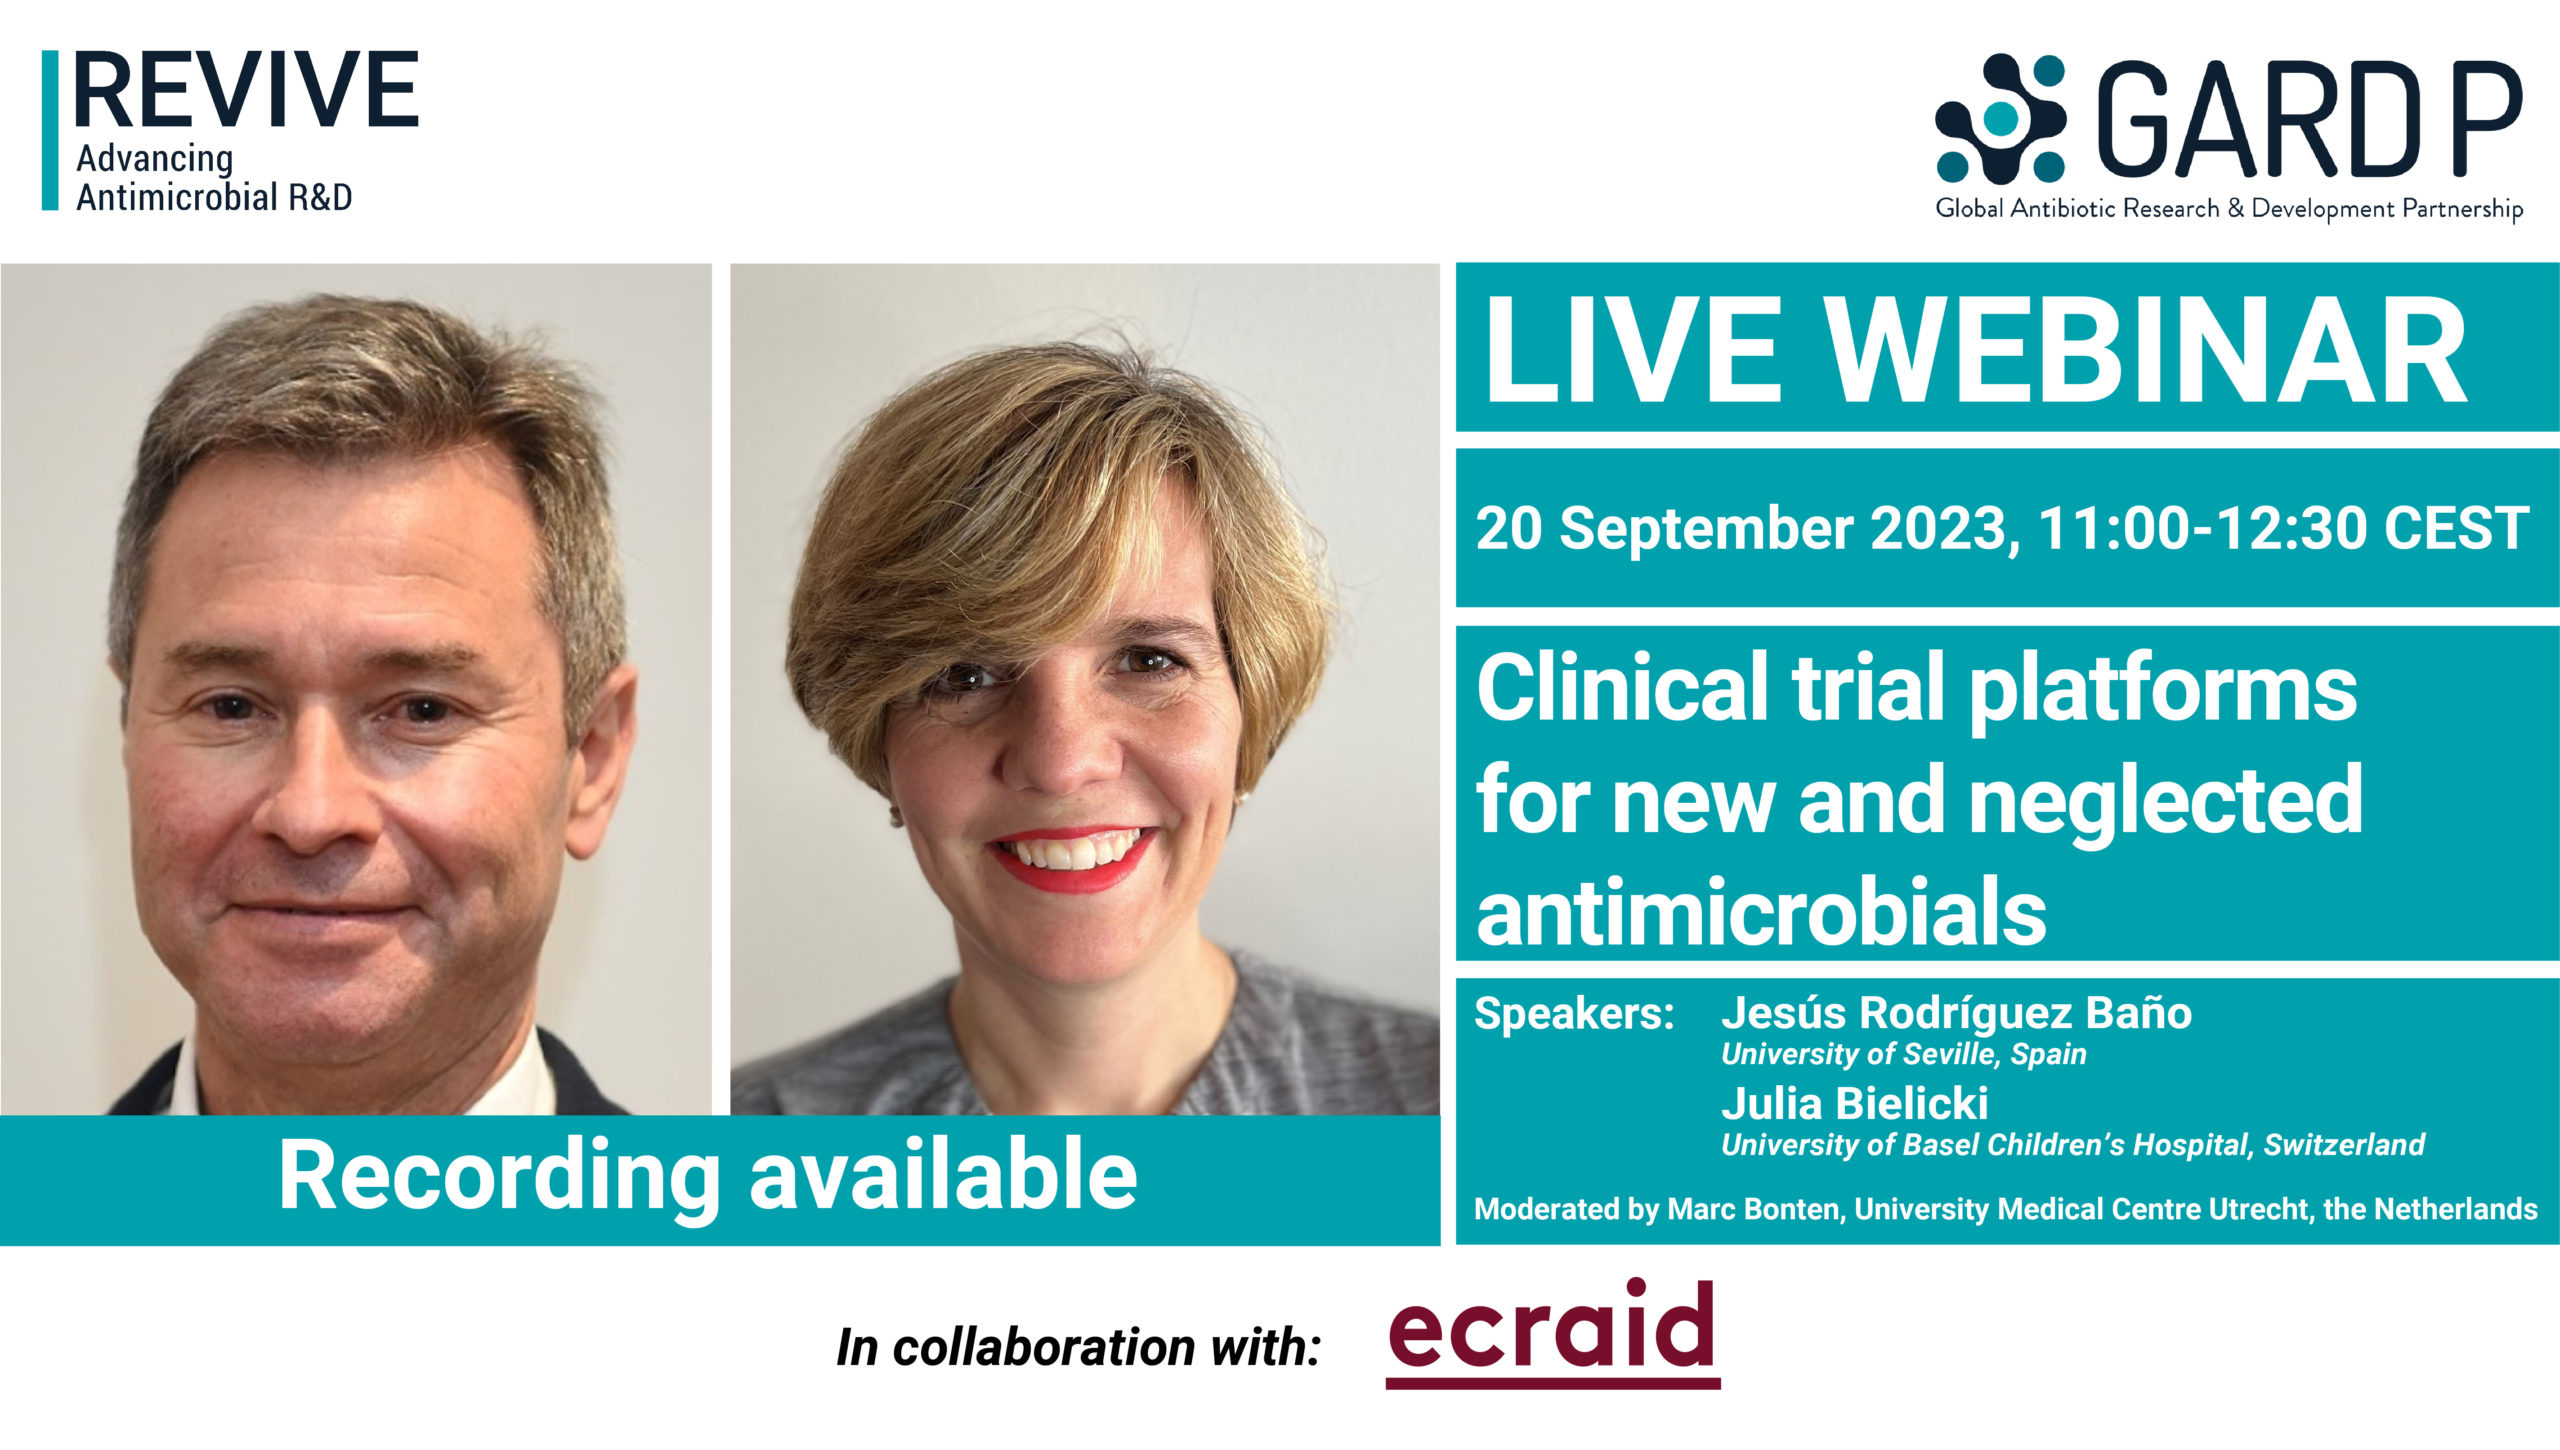 Clinical trial platforms for new and neglected antimicrobials